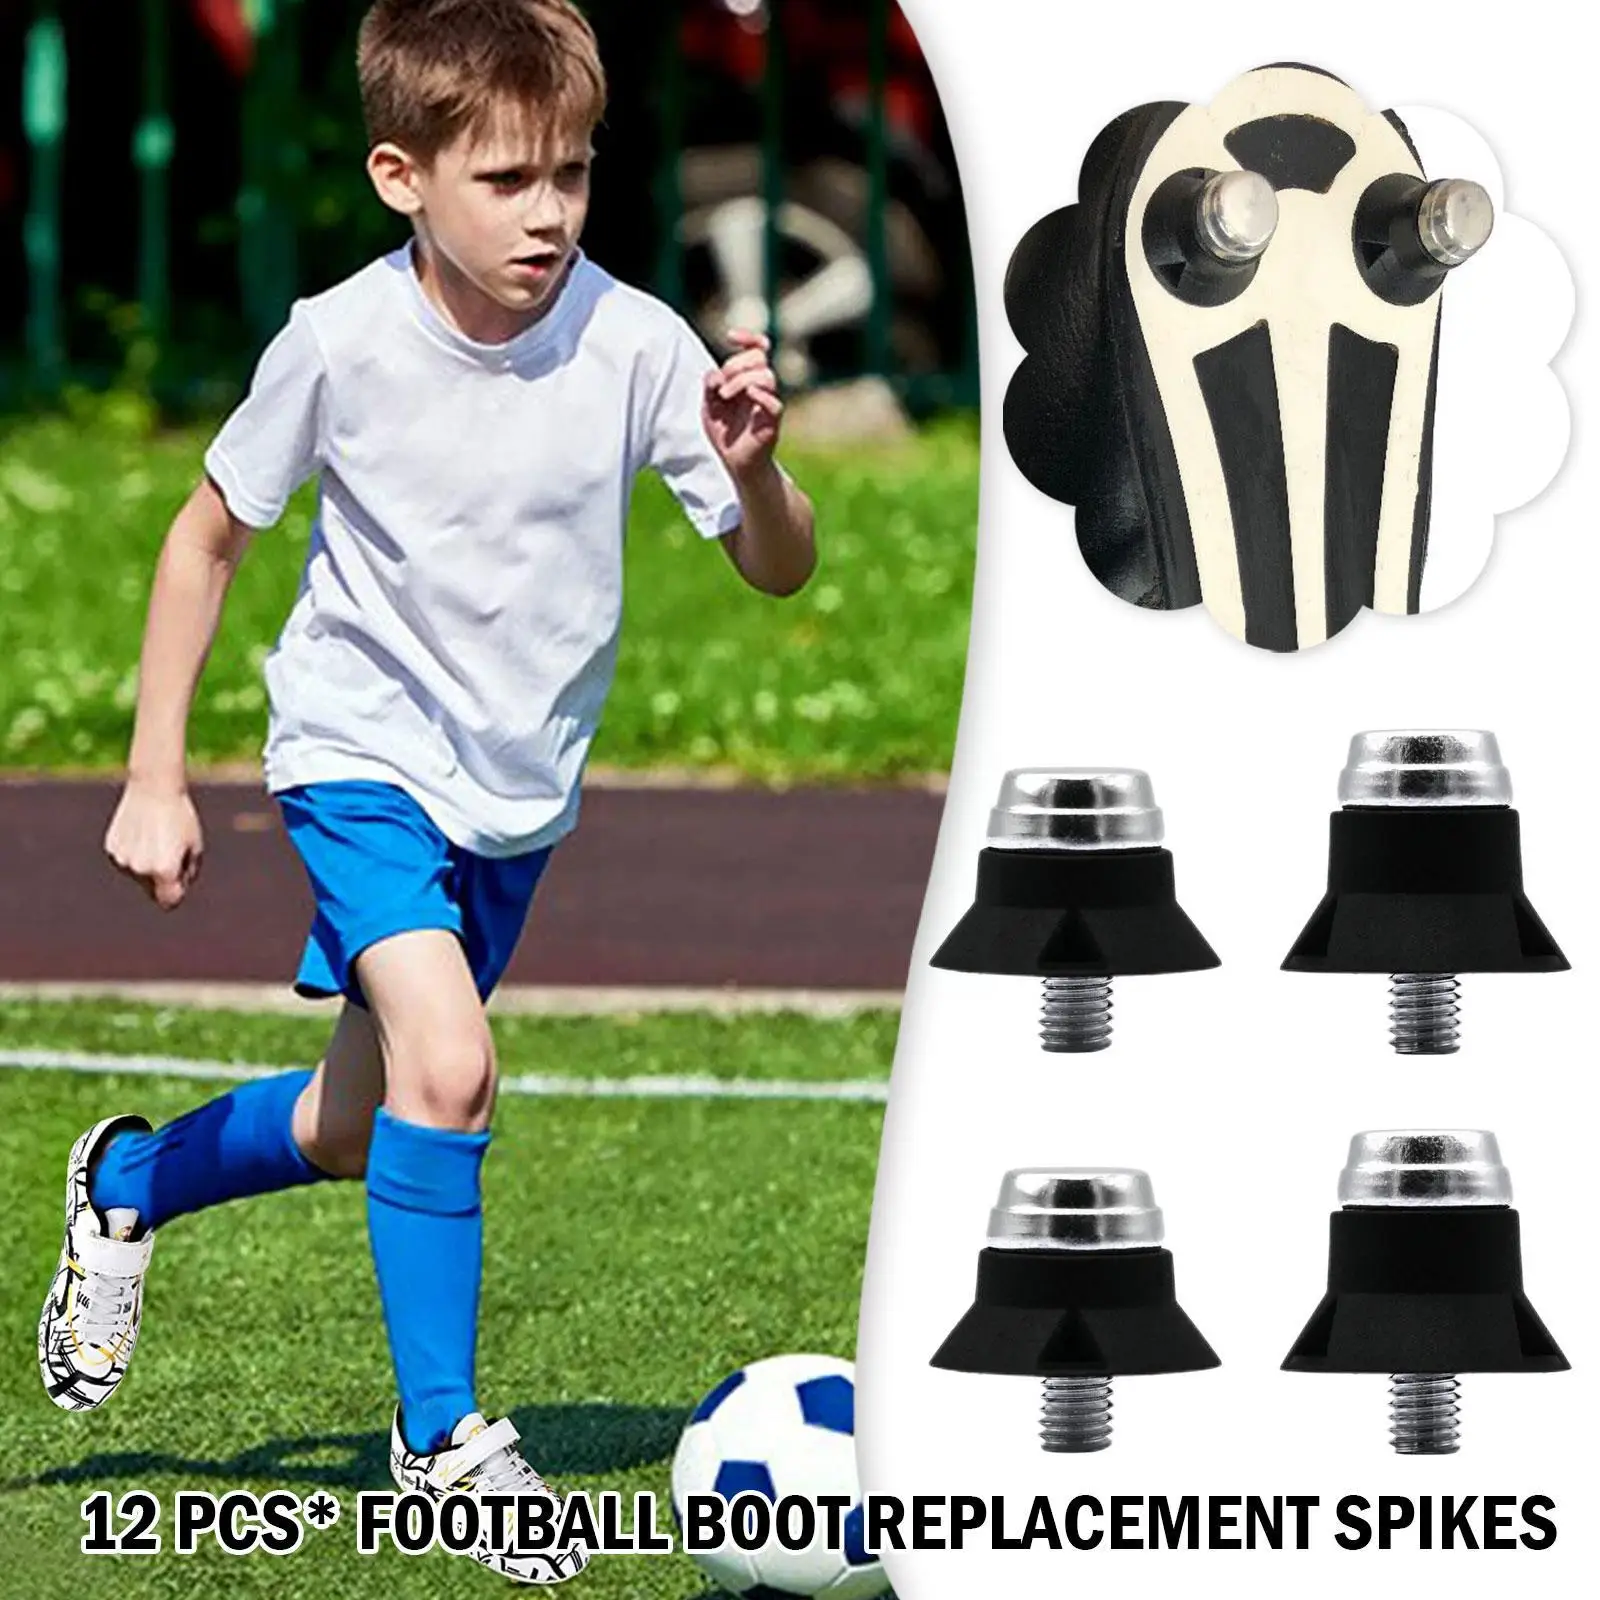 12 PCS/Set Football Boot Replacement Spikes 13/15mm Football Boot Studs For M5 Threaded Football Boots W8K8